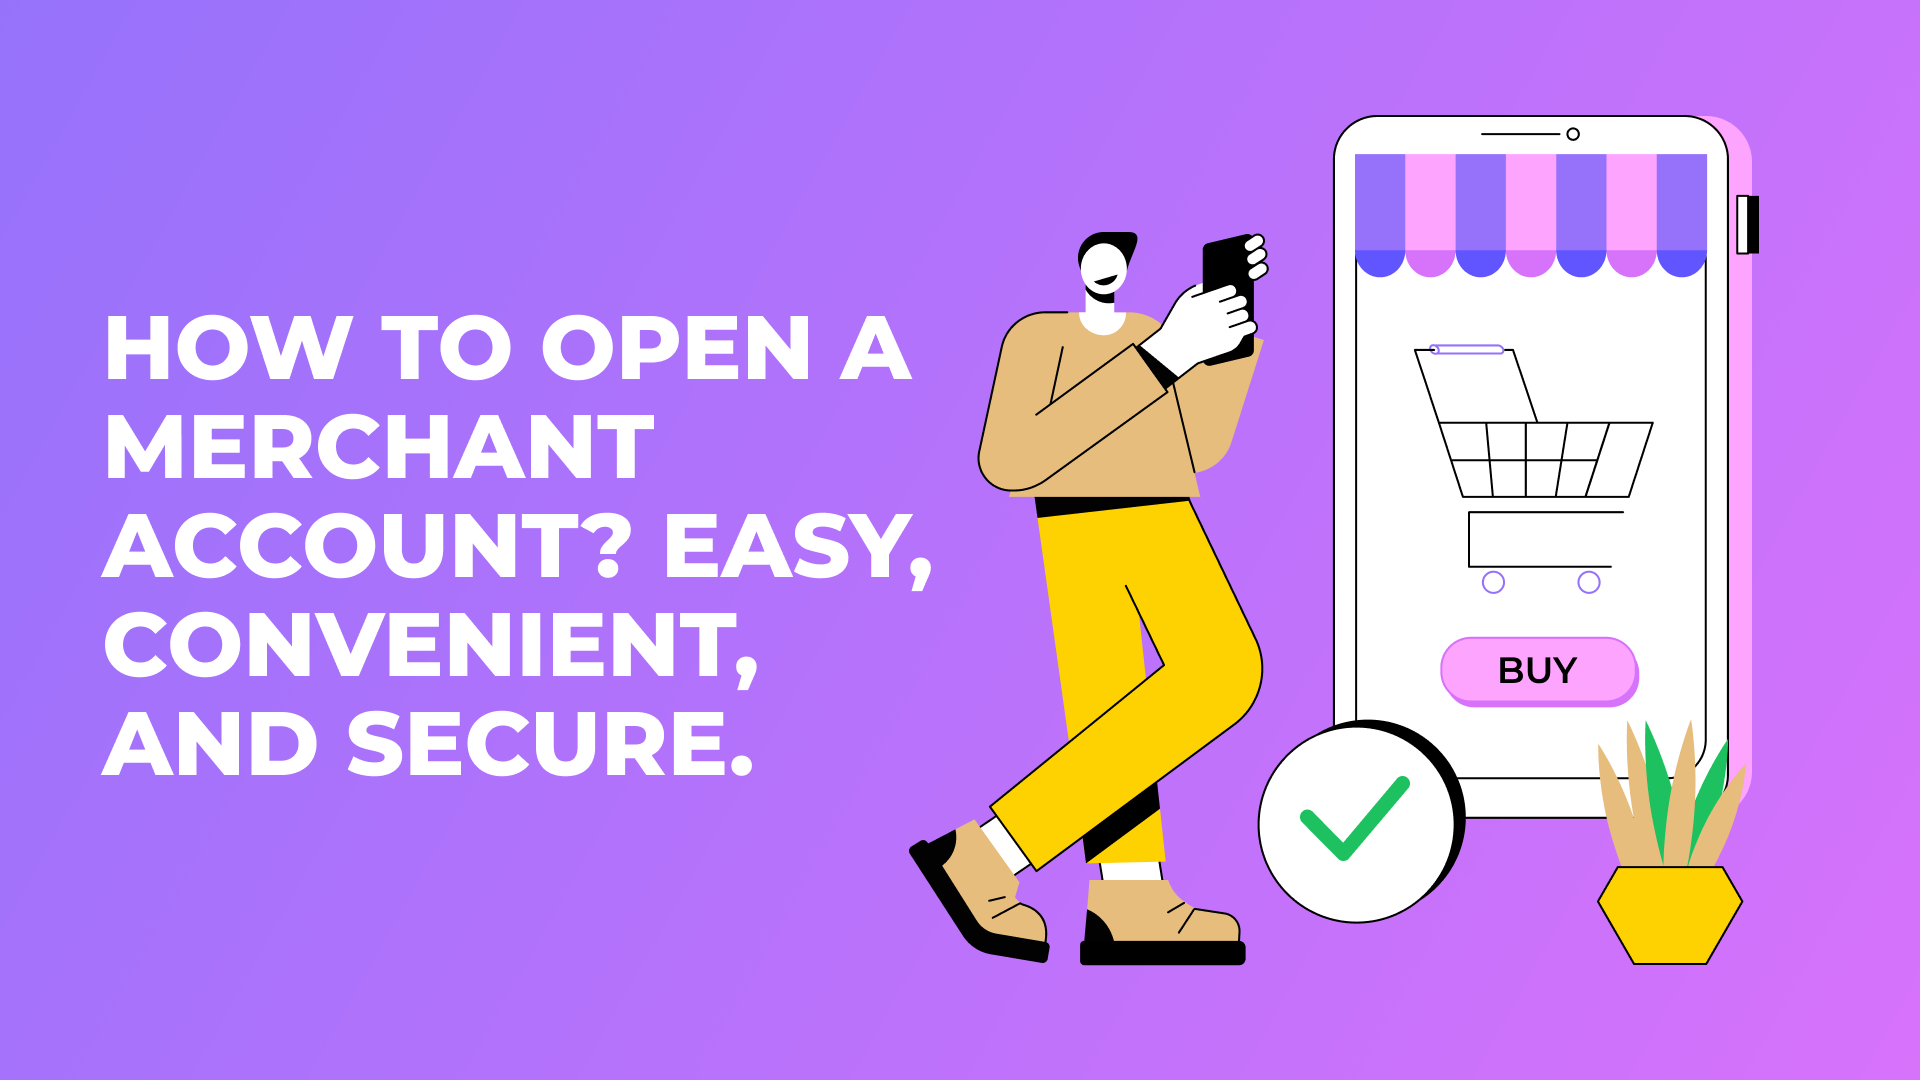 How to open a Merchant Account? Easy, convenient, and secure.